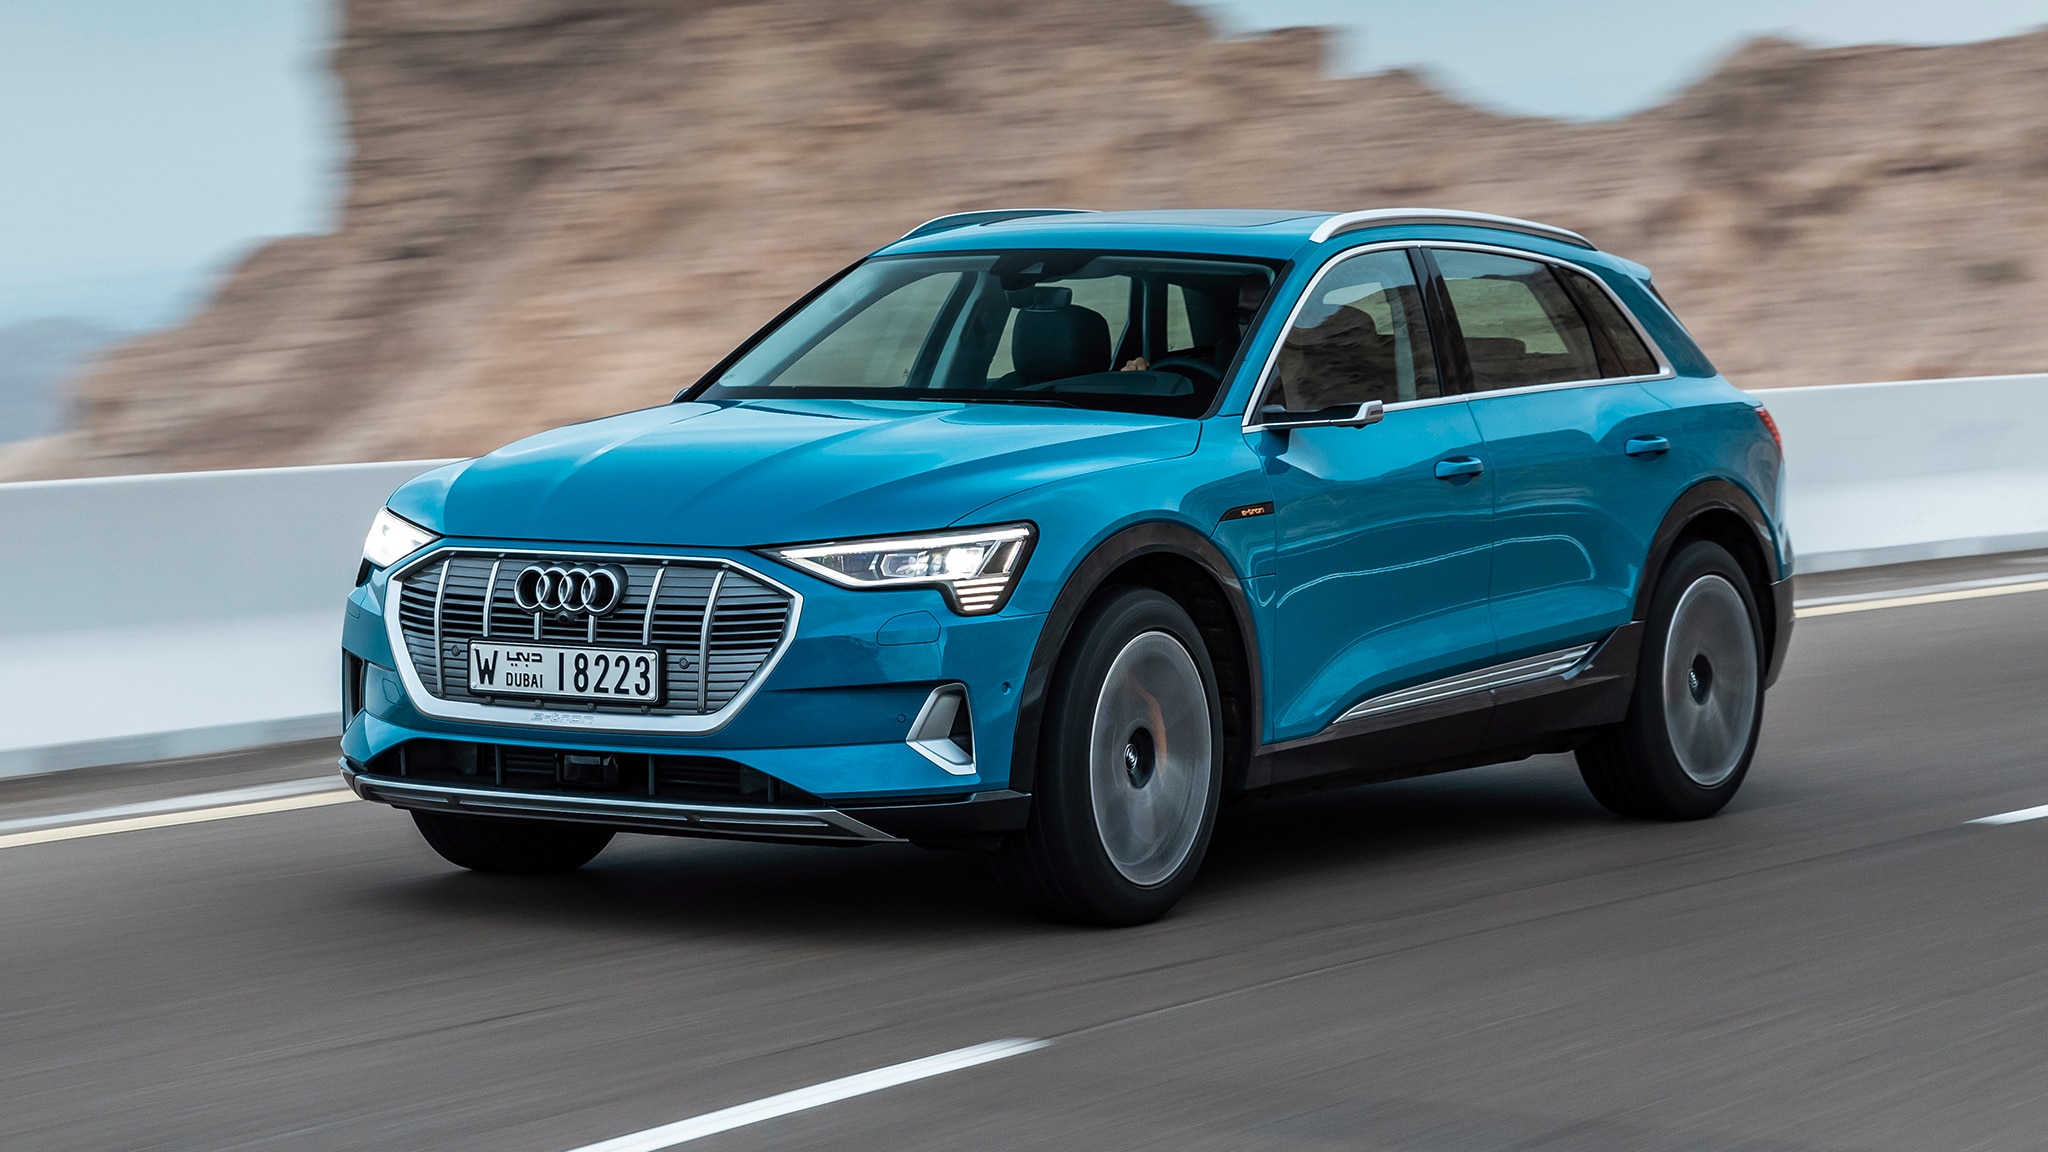 2019 Audi E-Tron First Drive: The End of the Beginning for Mainstream EVs